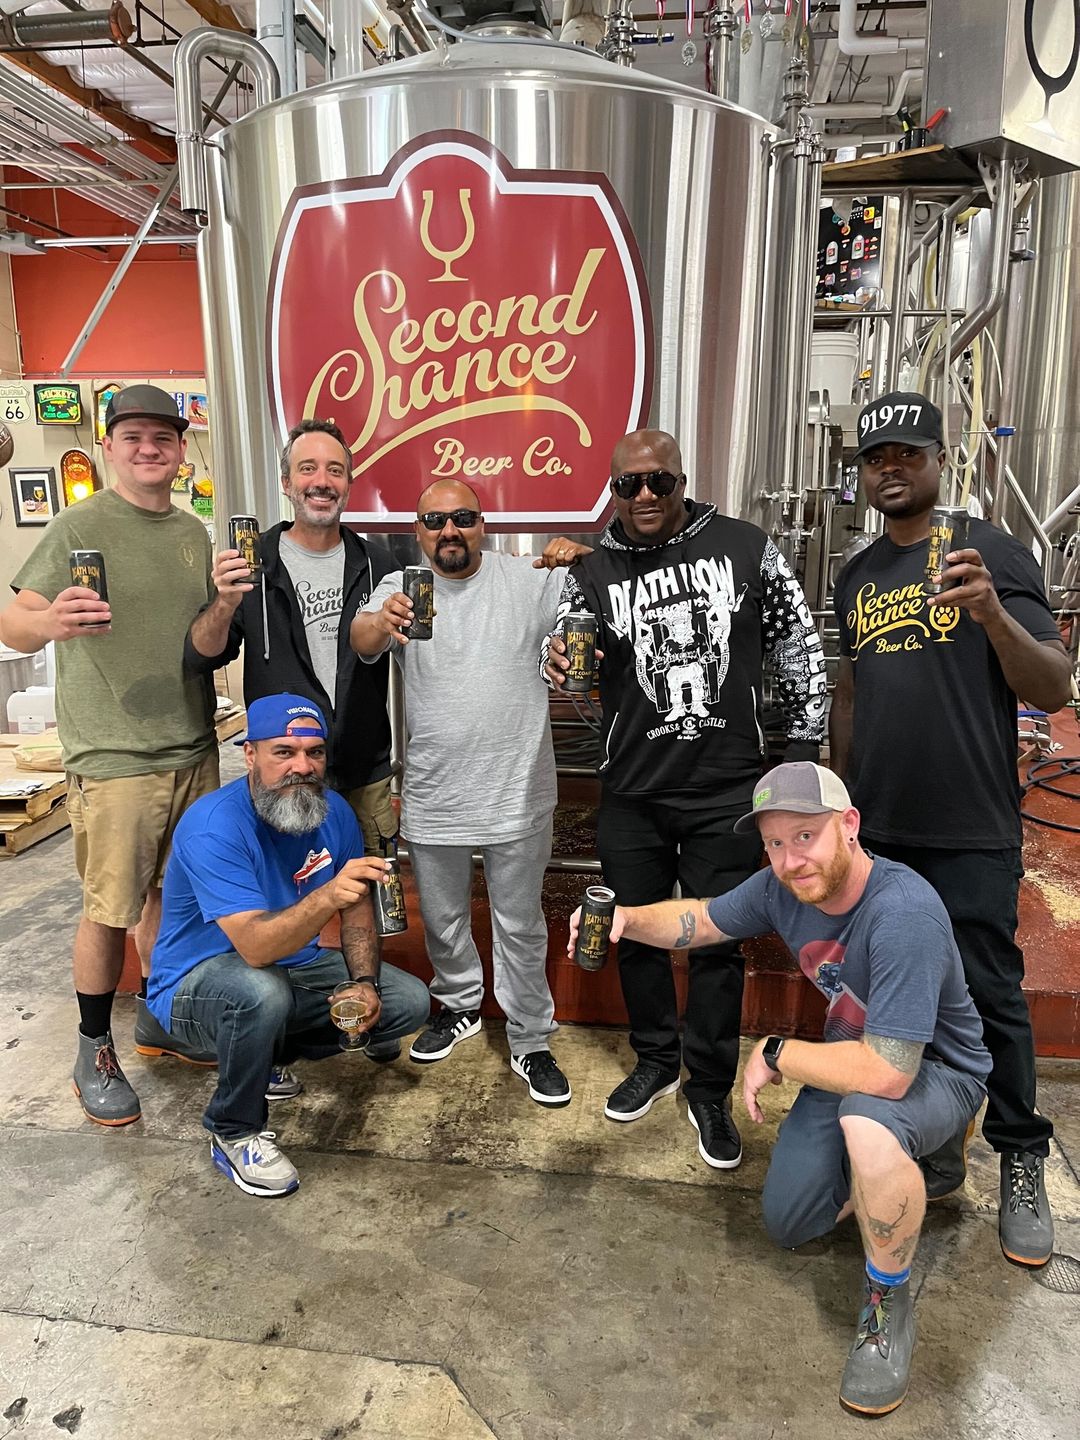 image courtesy of Second Chance Brewing